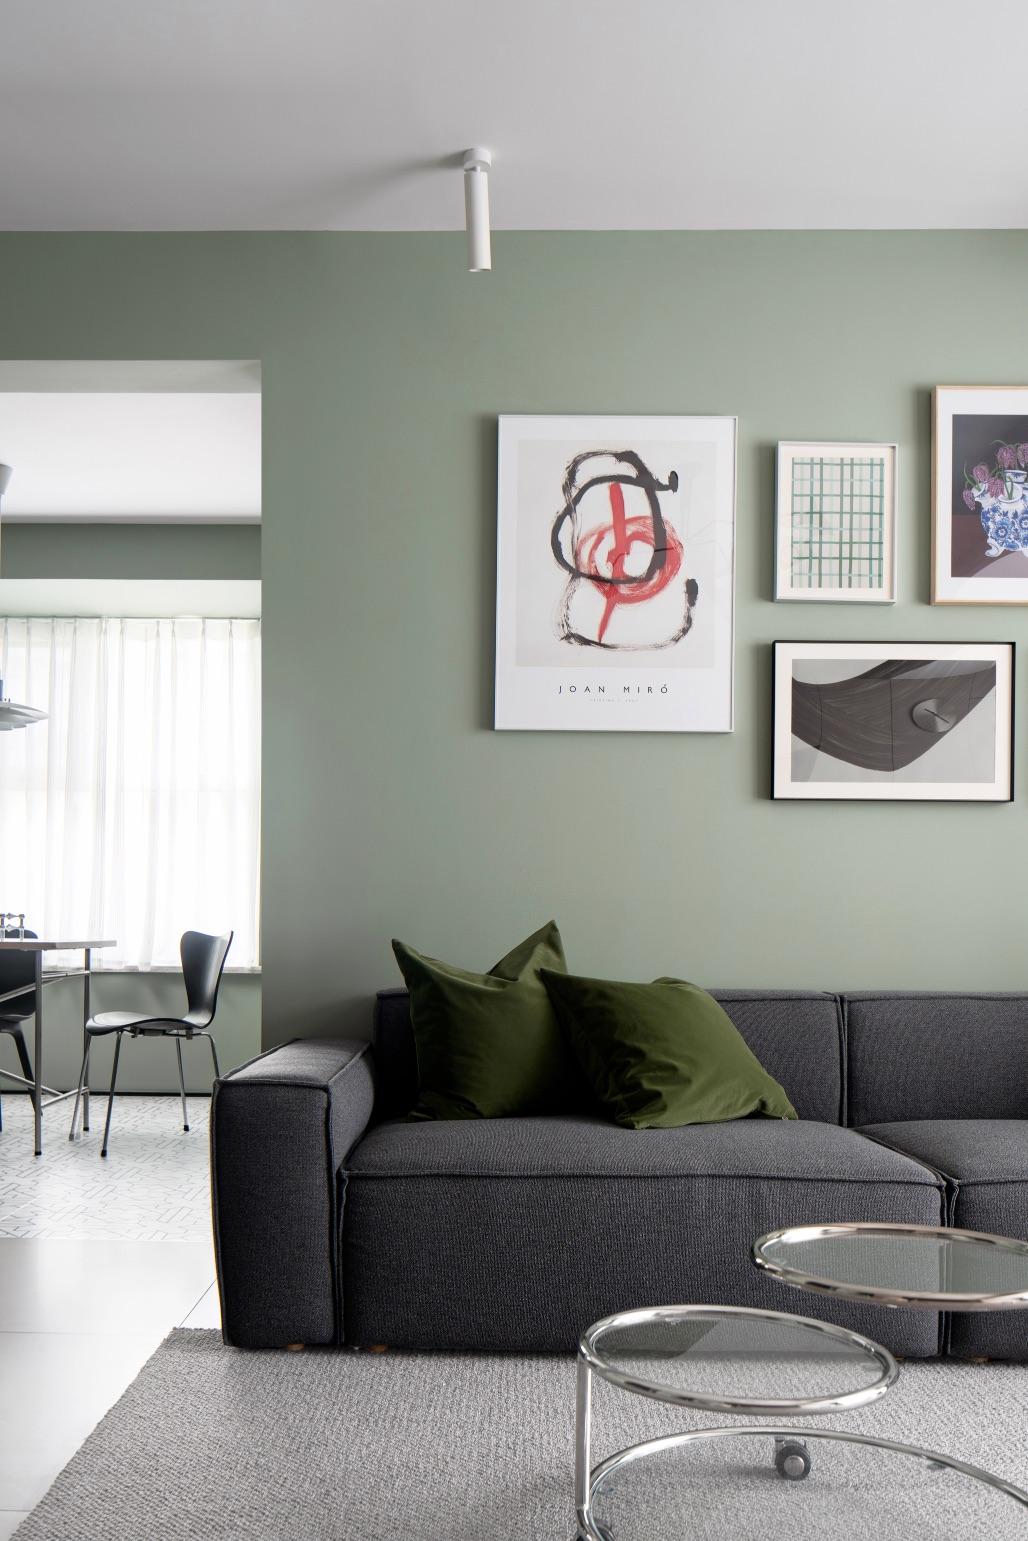  This cosy grey and green flat is a pandemic dream home